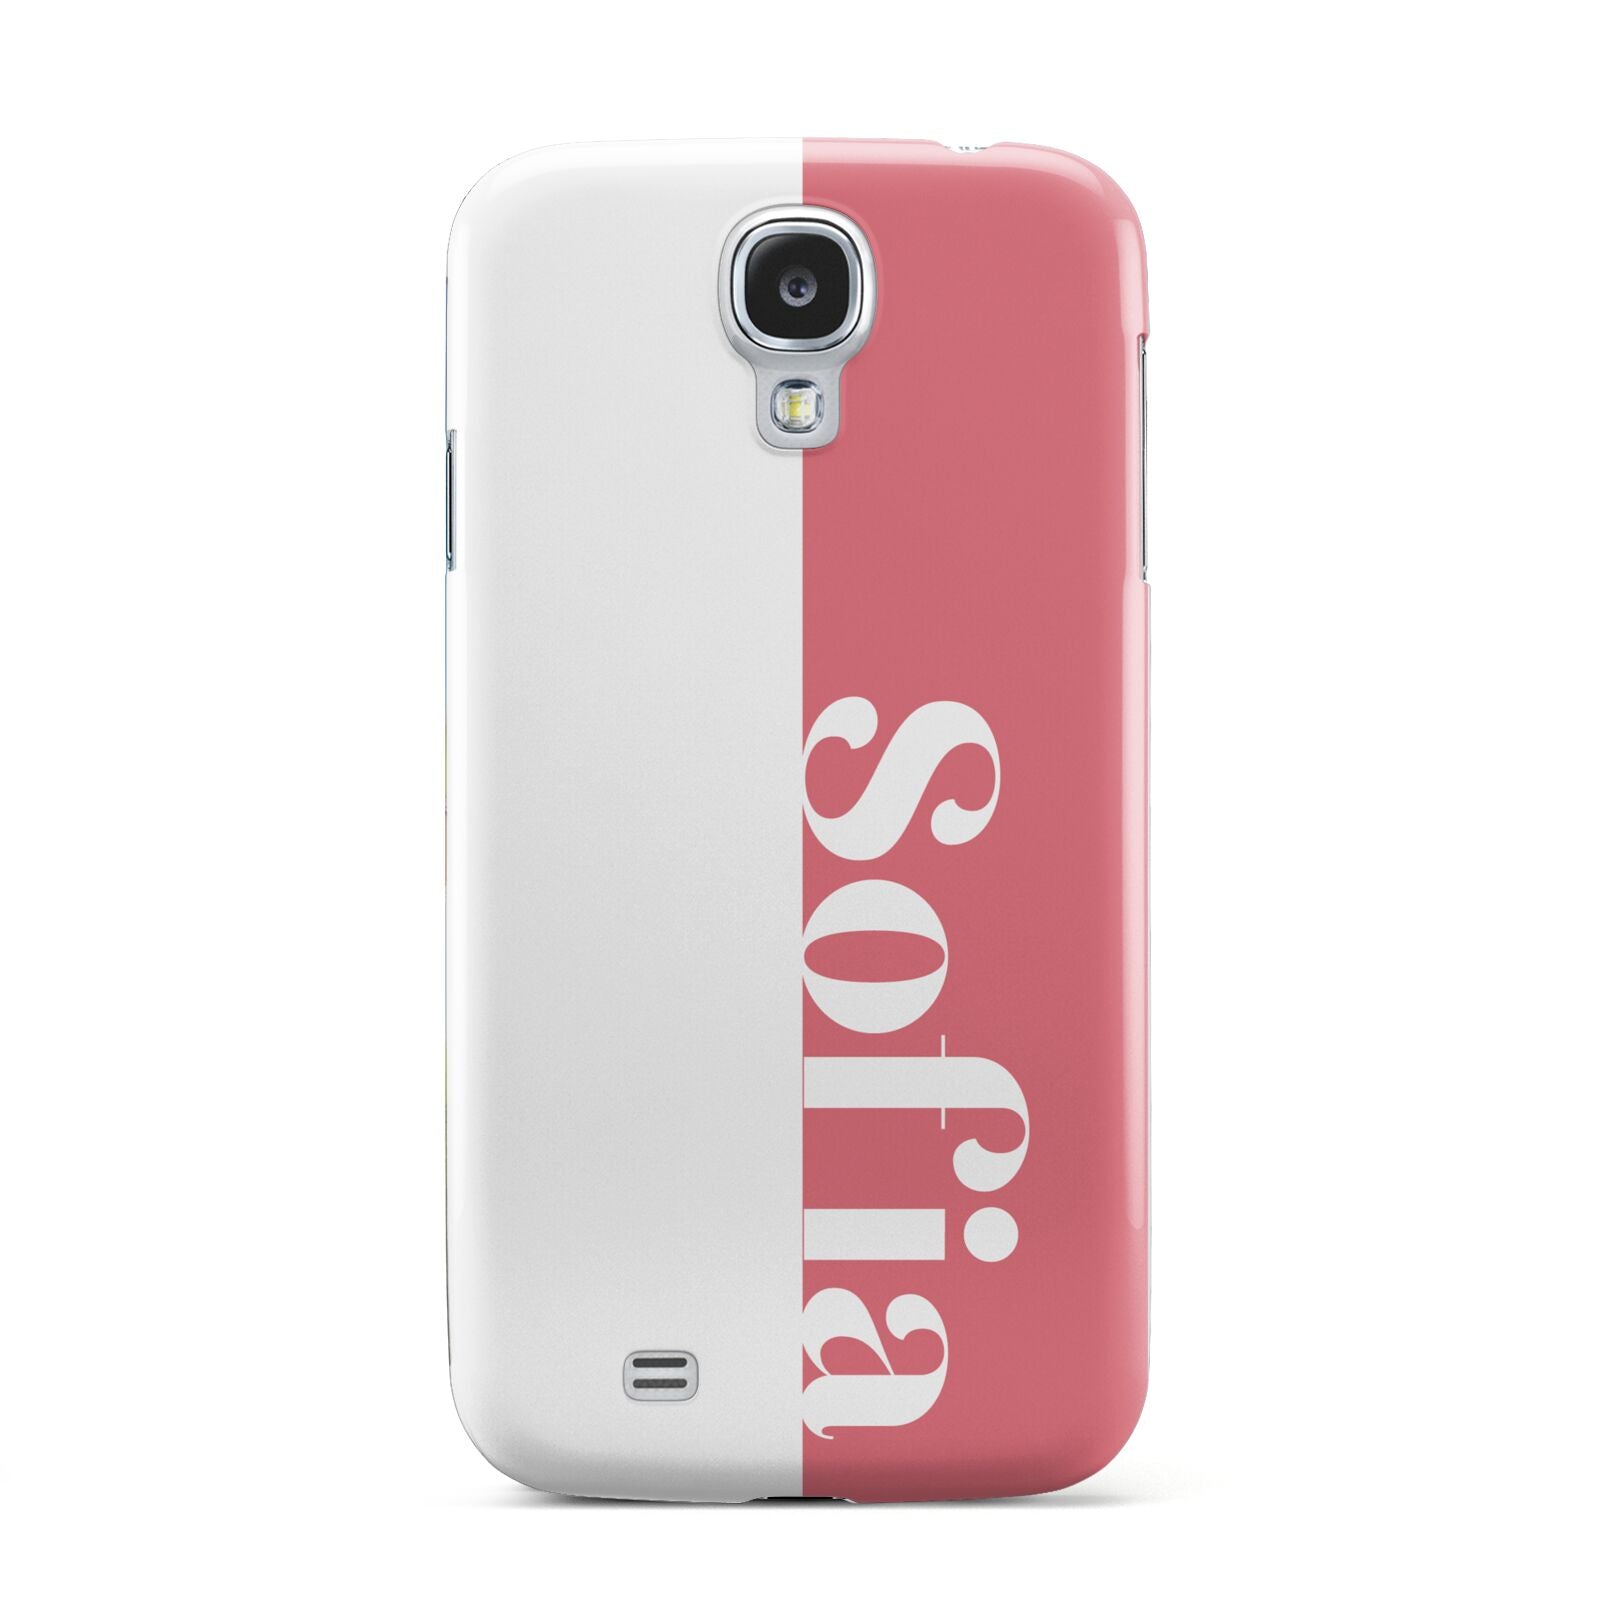 Pink White Personalised Samsung Galaxy S4 Case